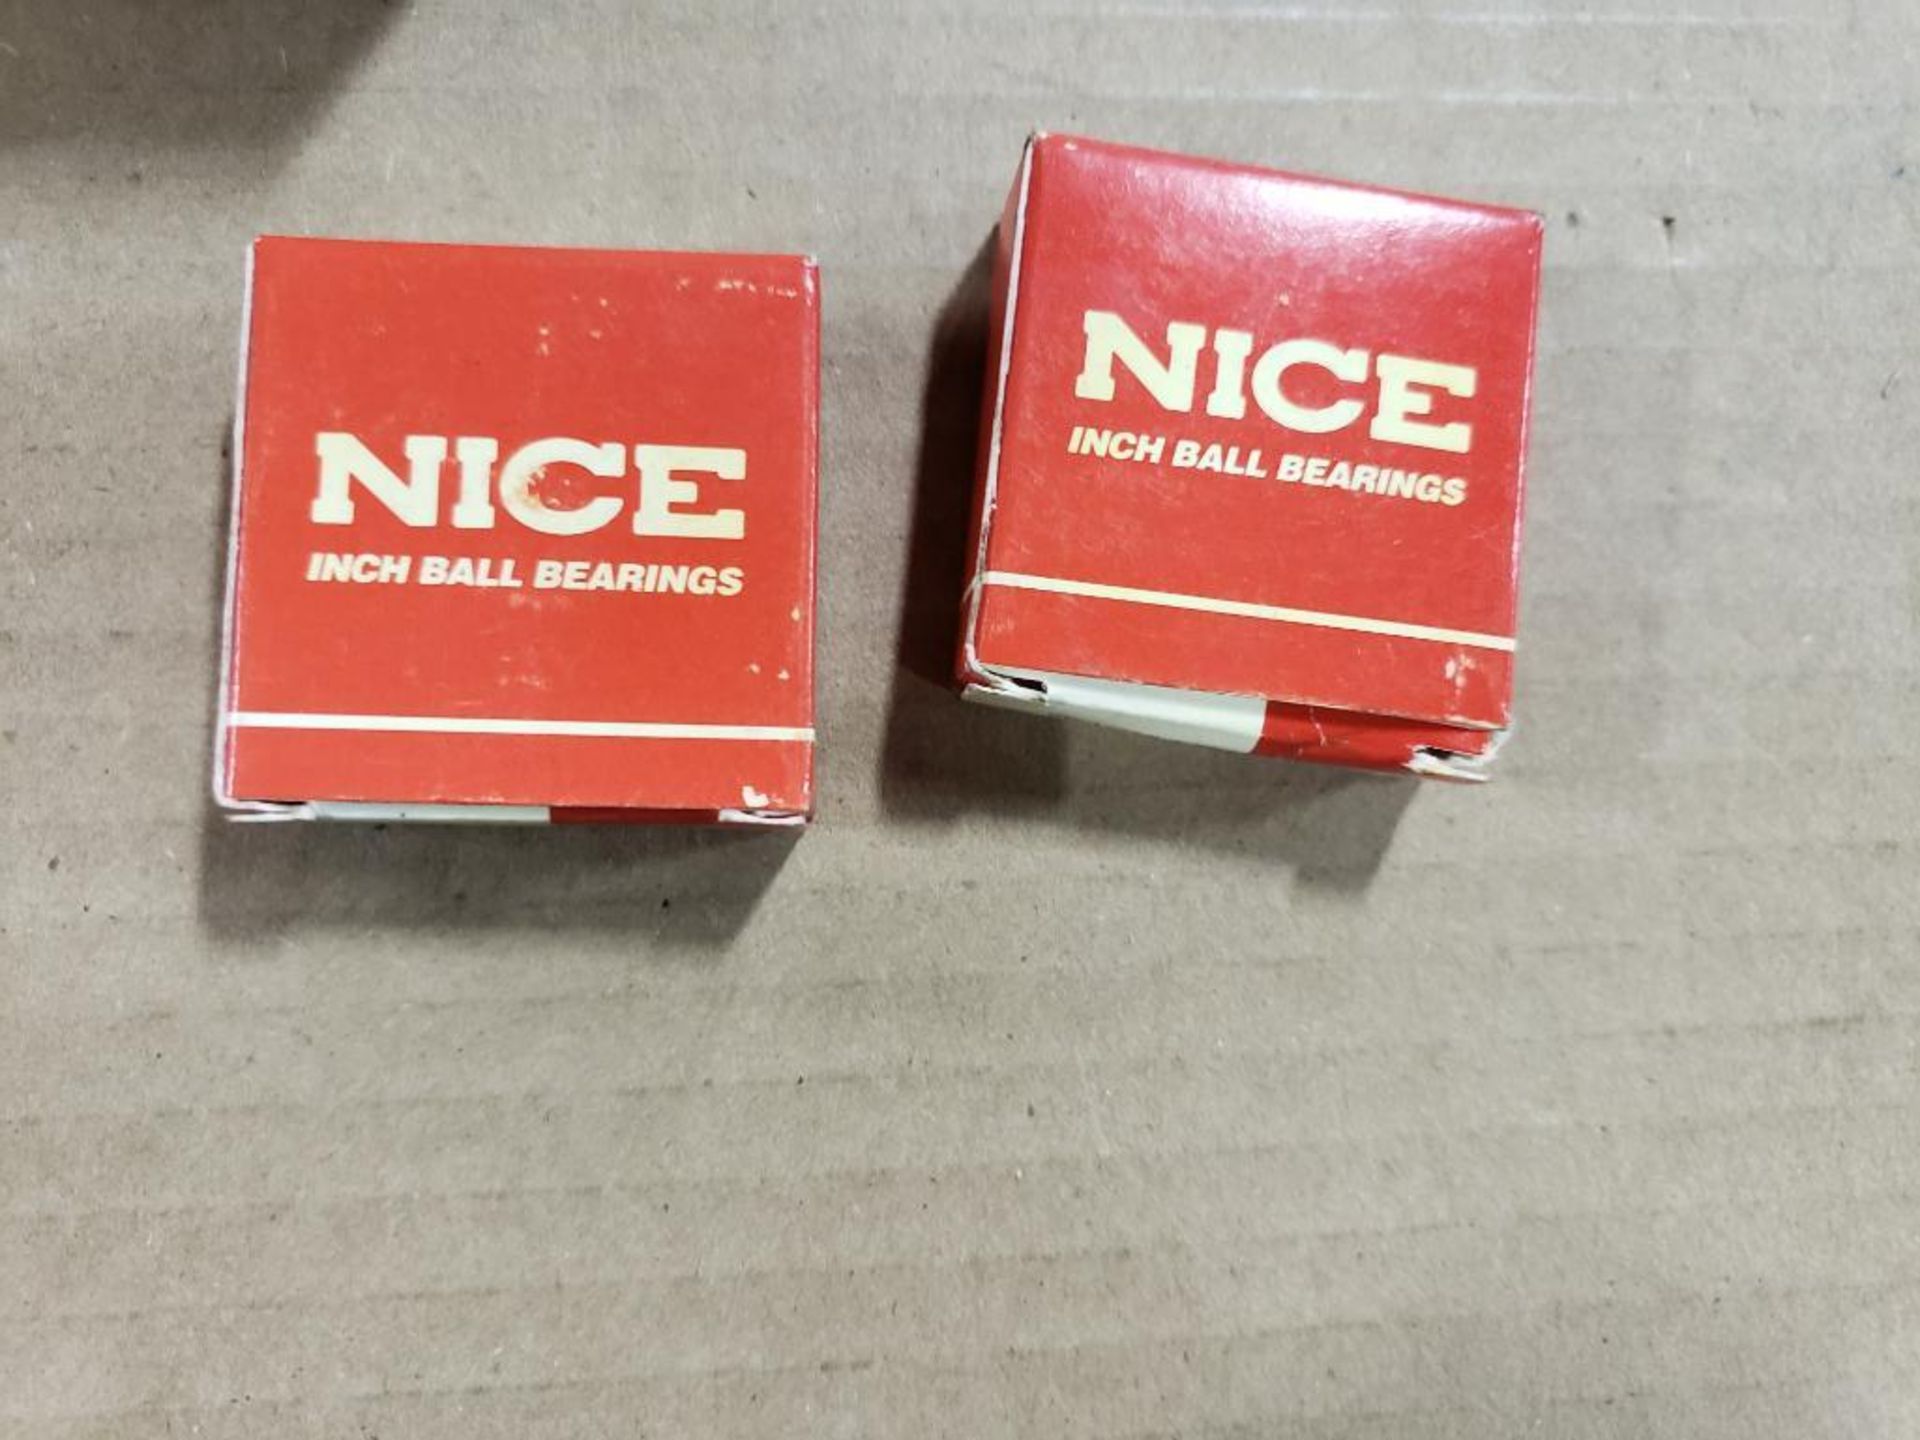 Qty 8 - Assorted bearing, sleeve, hub. Dodge, RBC, Lovejoy, Nice. New in box. - Image 9 of 13